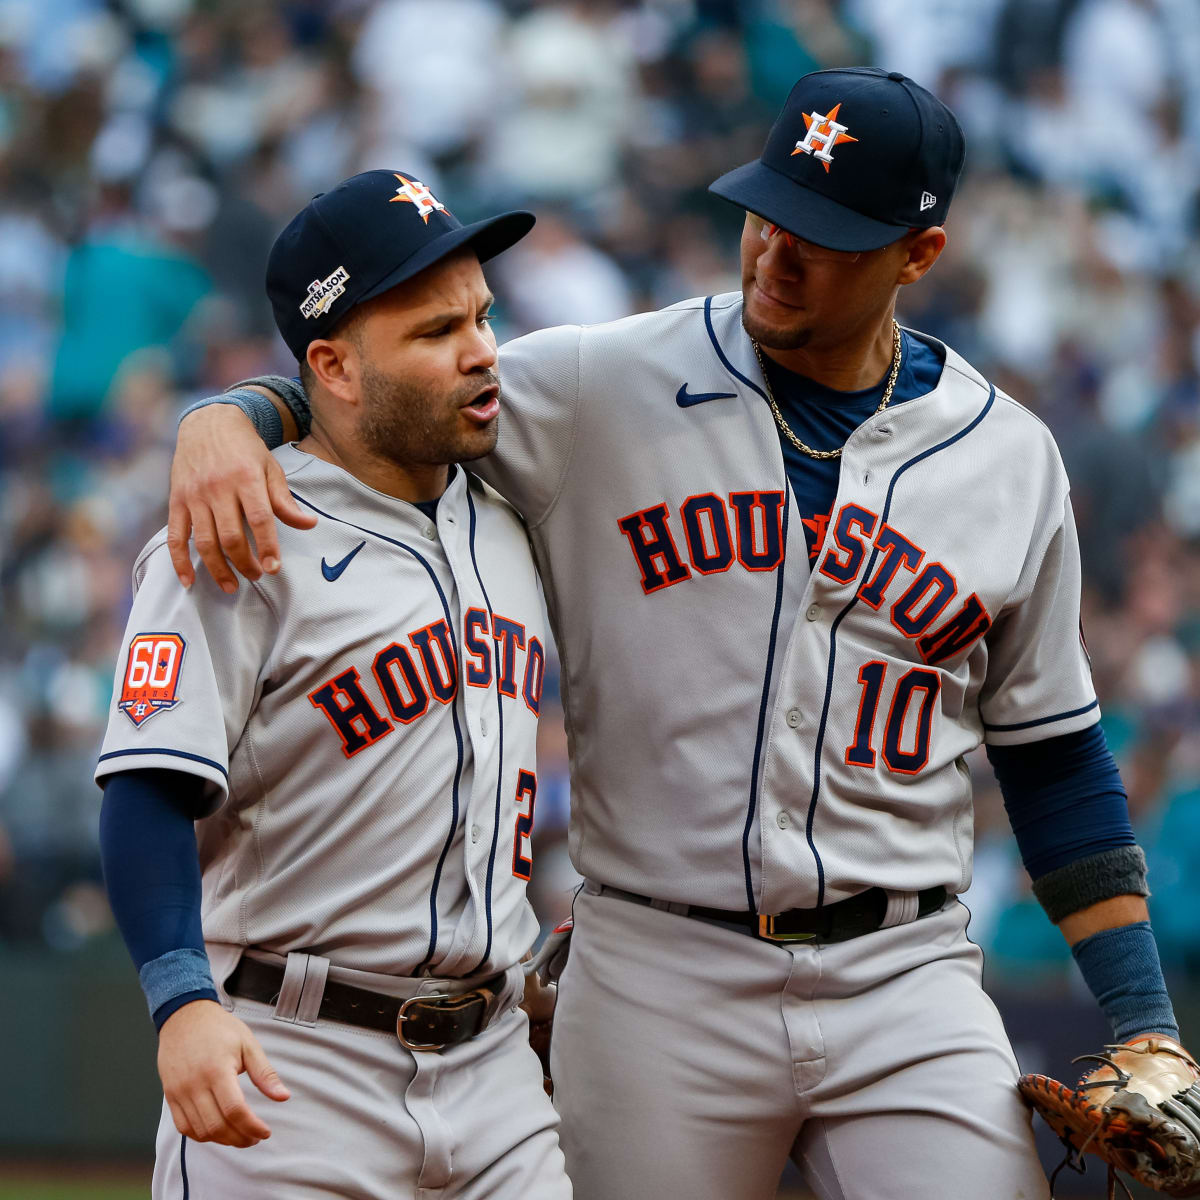 Astros-Yankees MLB American League Championship Series Odds and